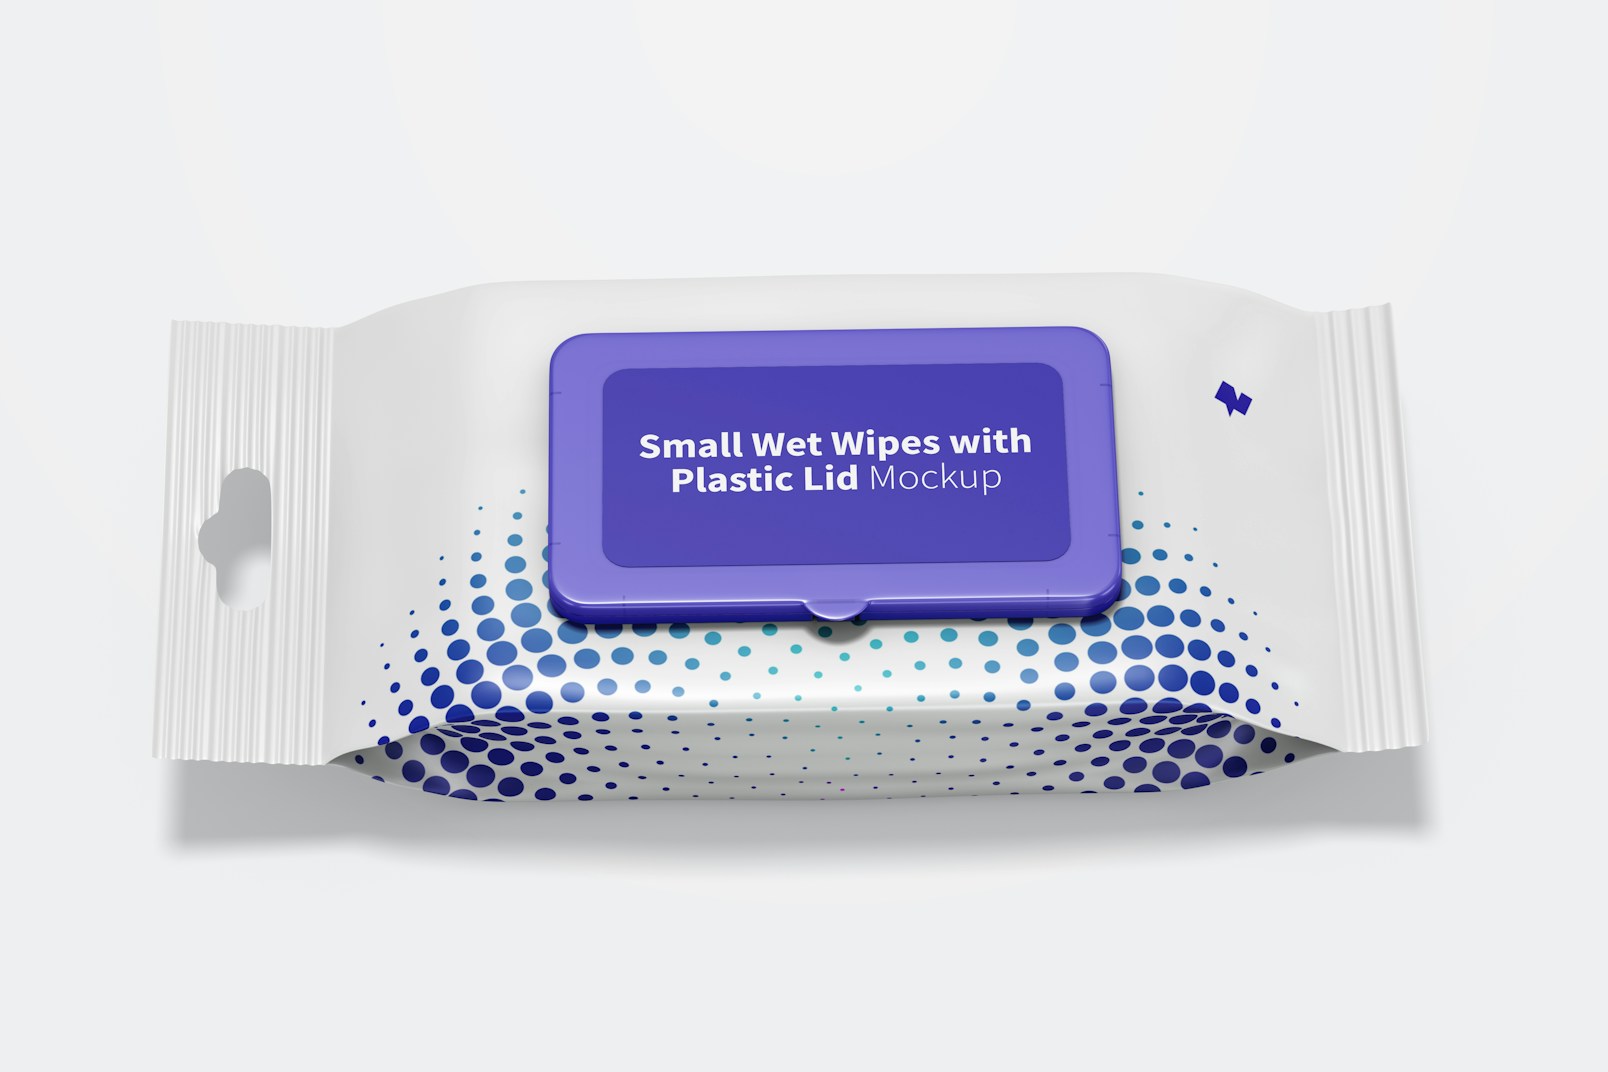 Small Wet Wipes with Plastic Lid Packaging Mockup